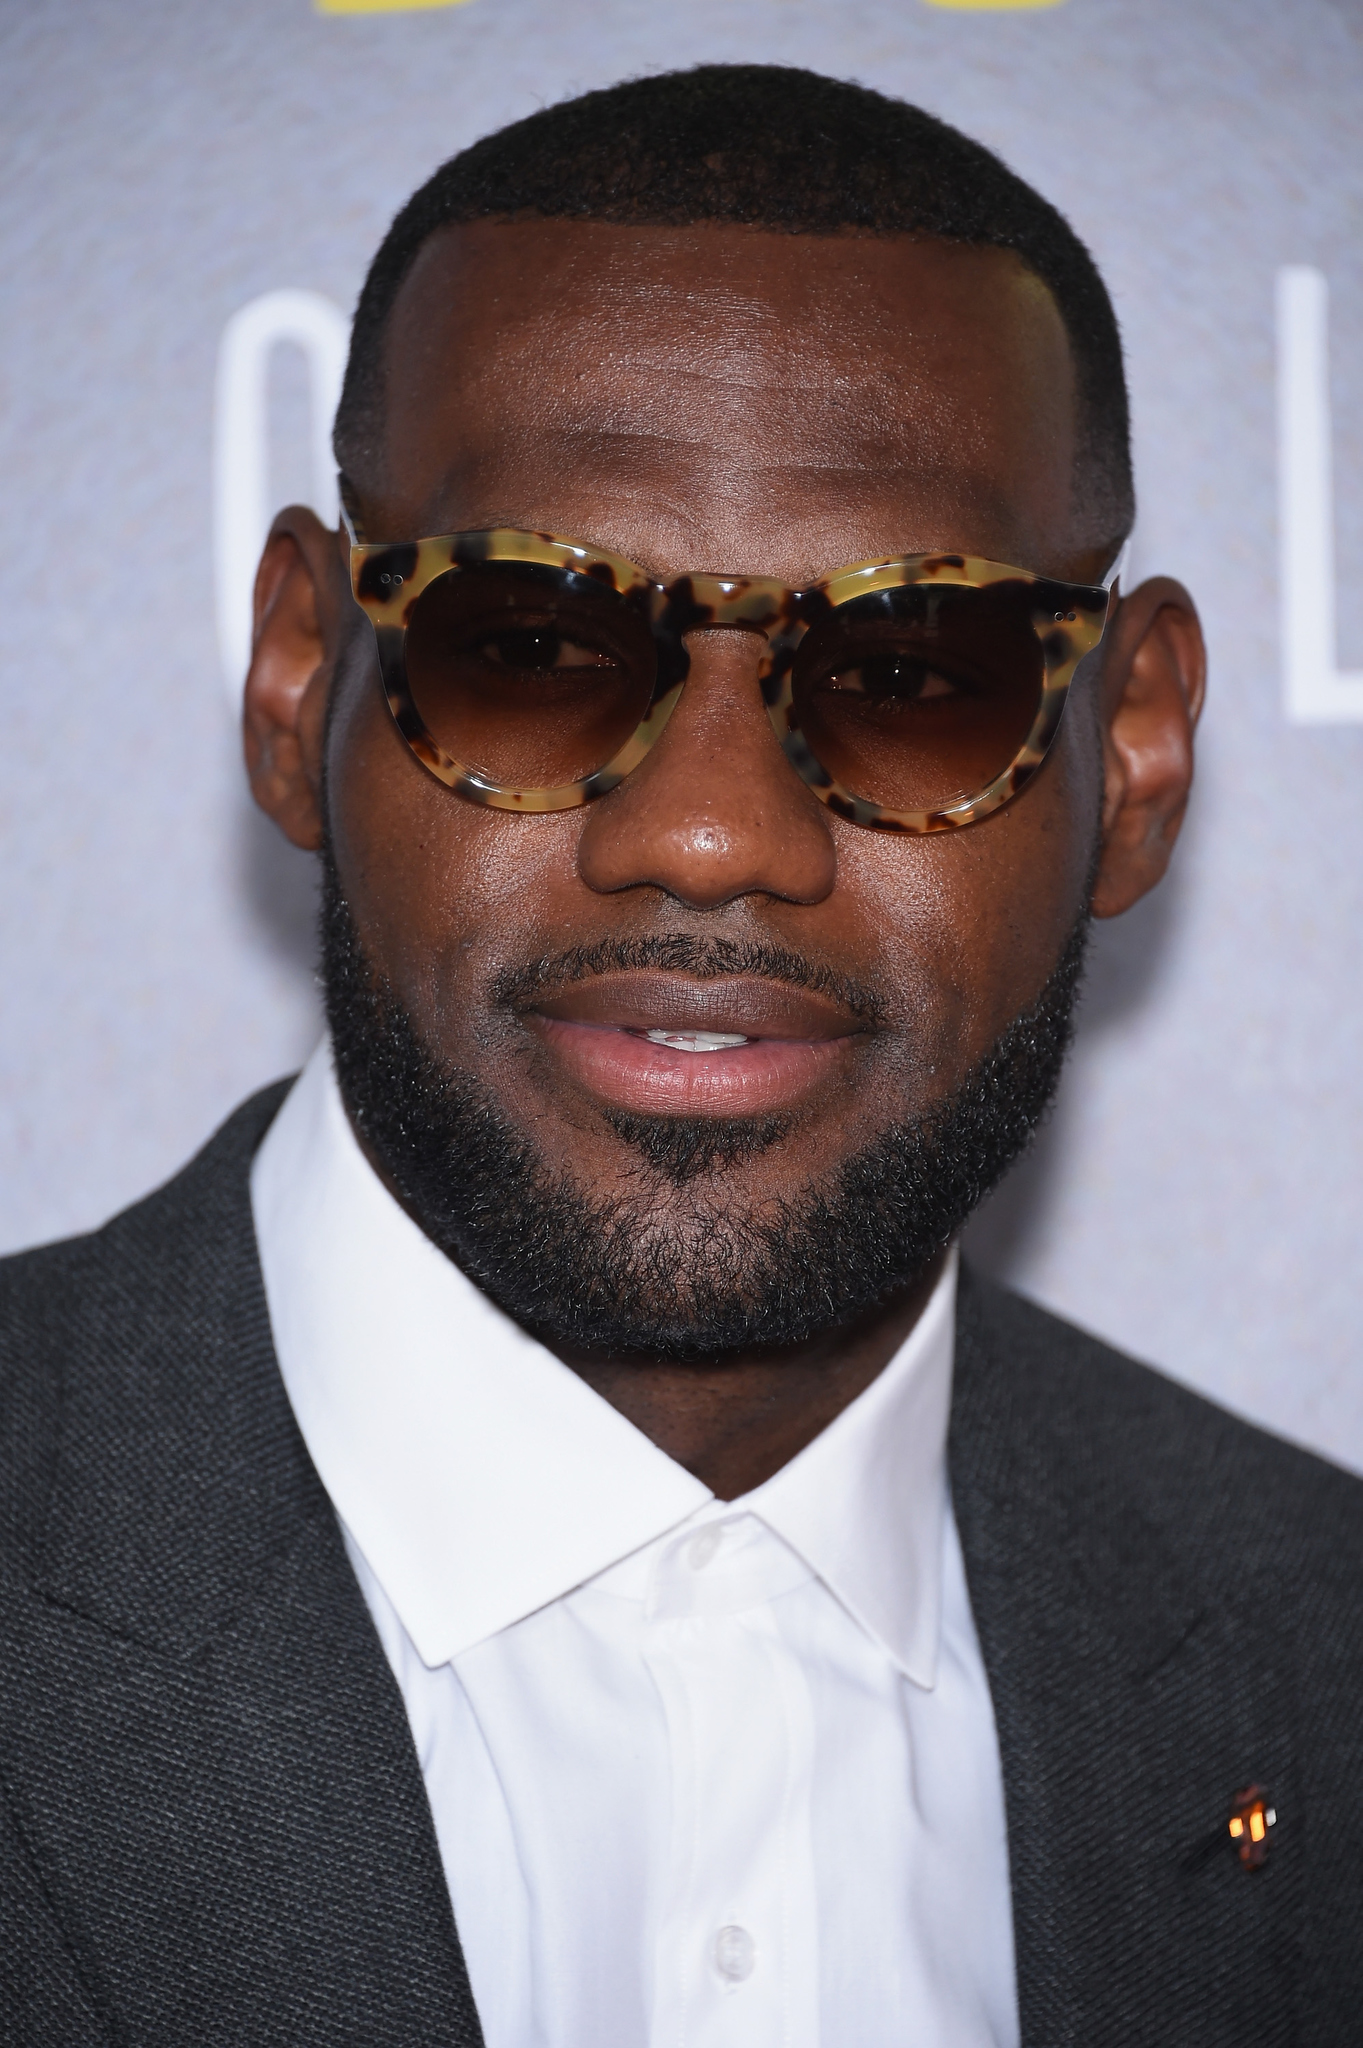 LeBron James at event of Be stabdziu (2015)